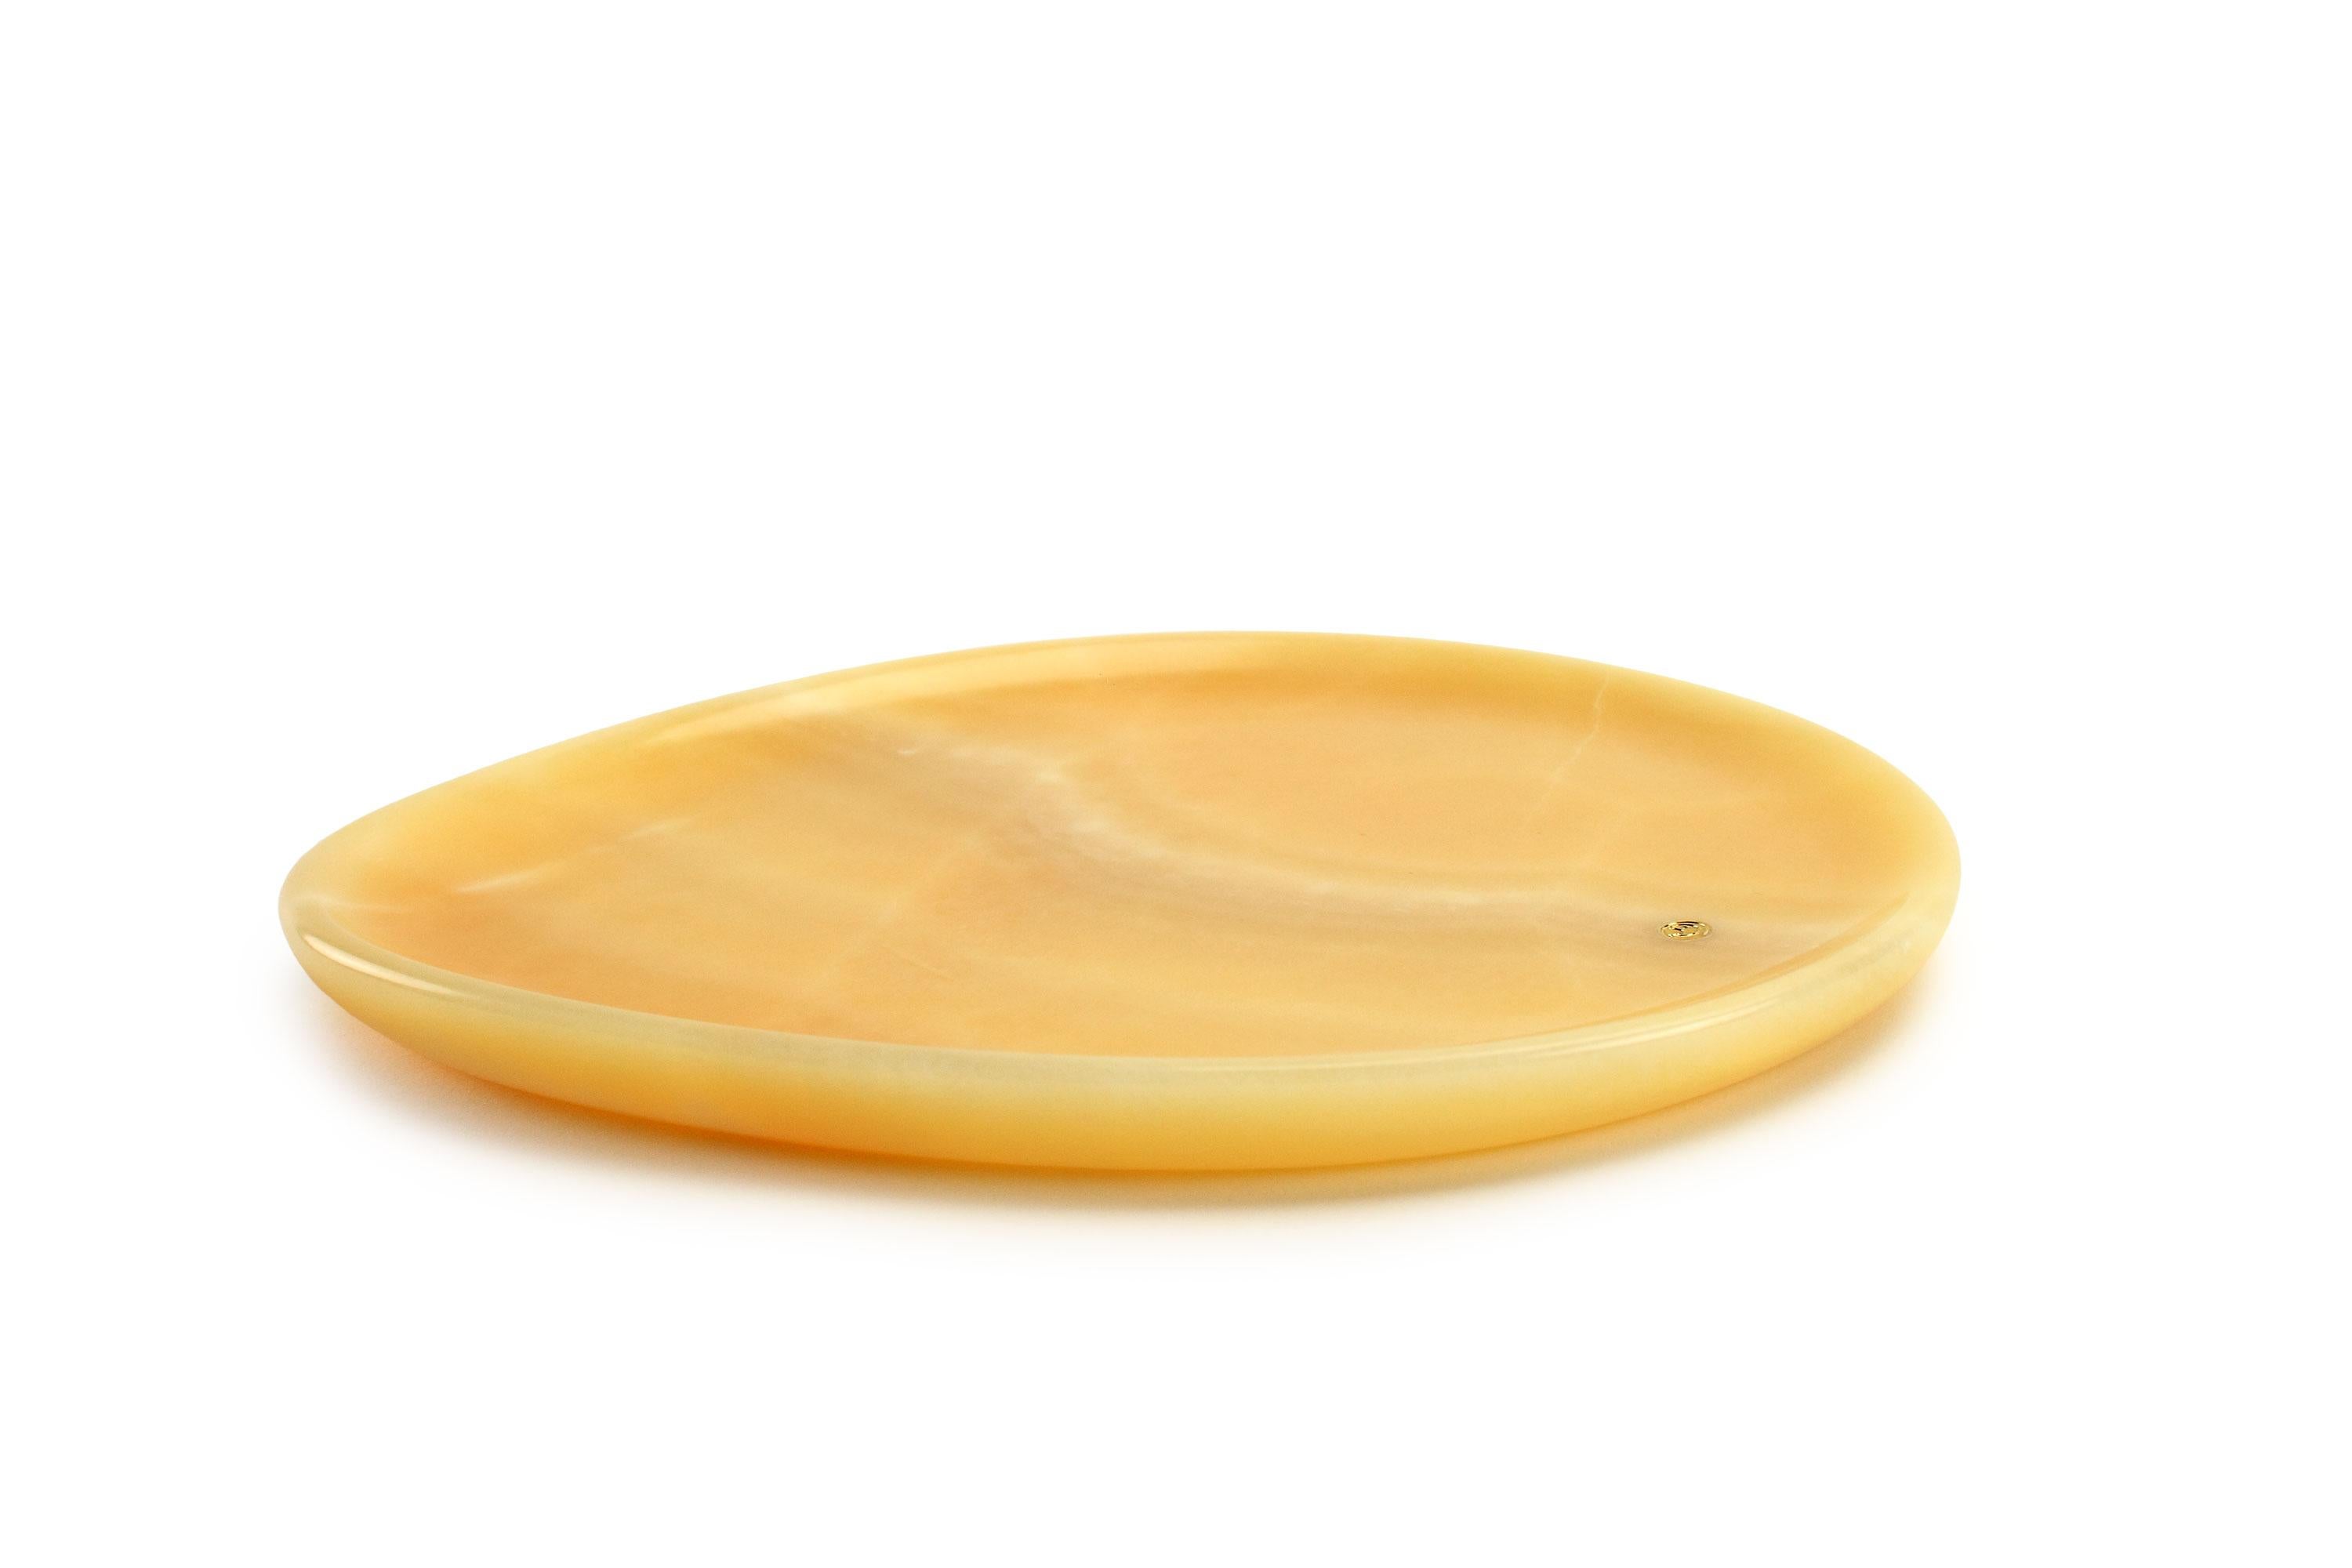 Hand carved presentation plate from orange onyx. Multiple use as plates, platters and placers. The polished finishing underlines the transparency of the onyx making this a very precious object. 

Dimensions: Small L 24, W 20, H 1.8 cm, also